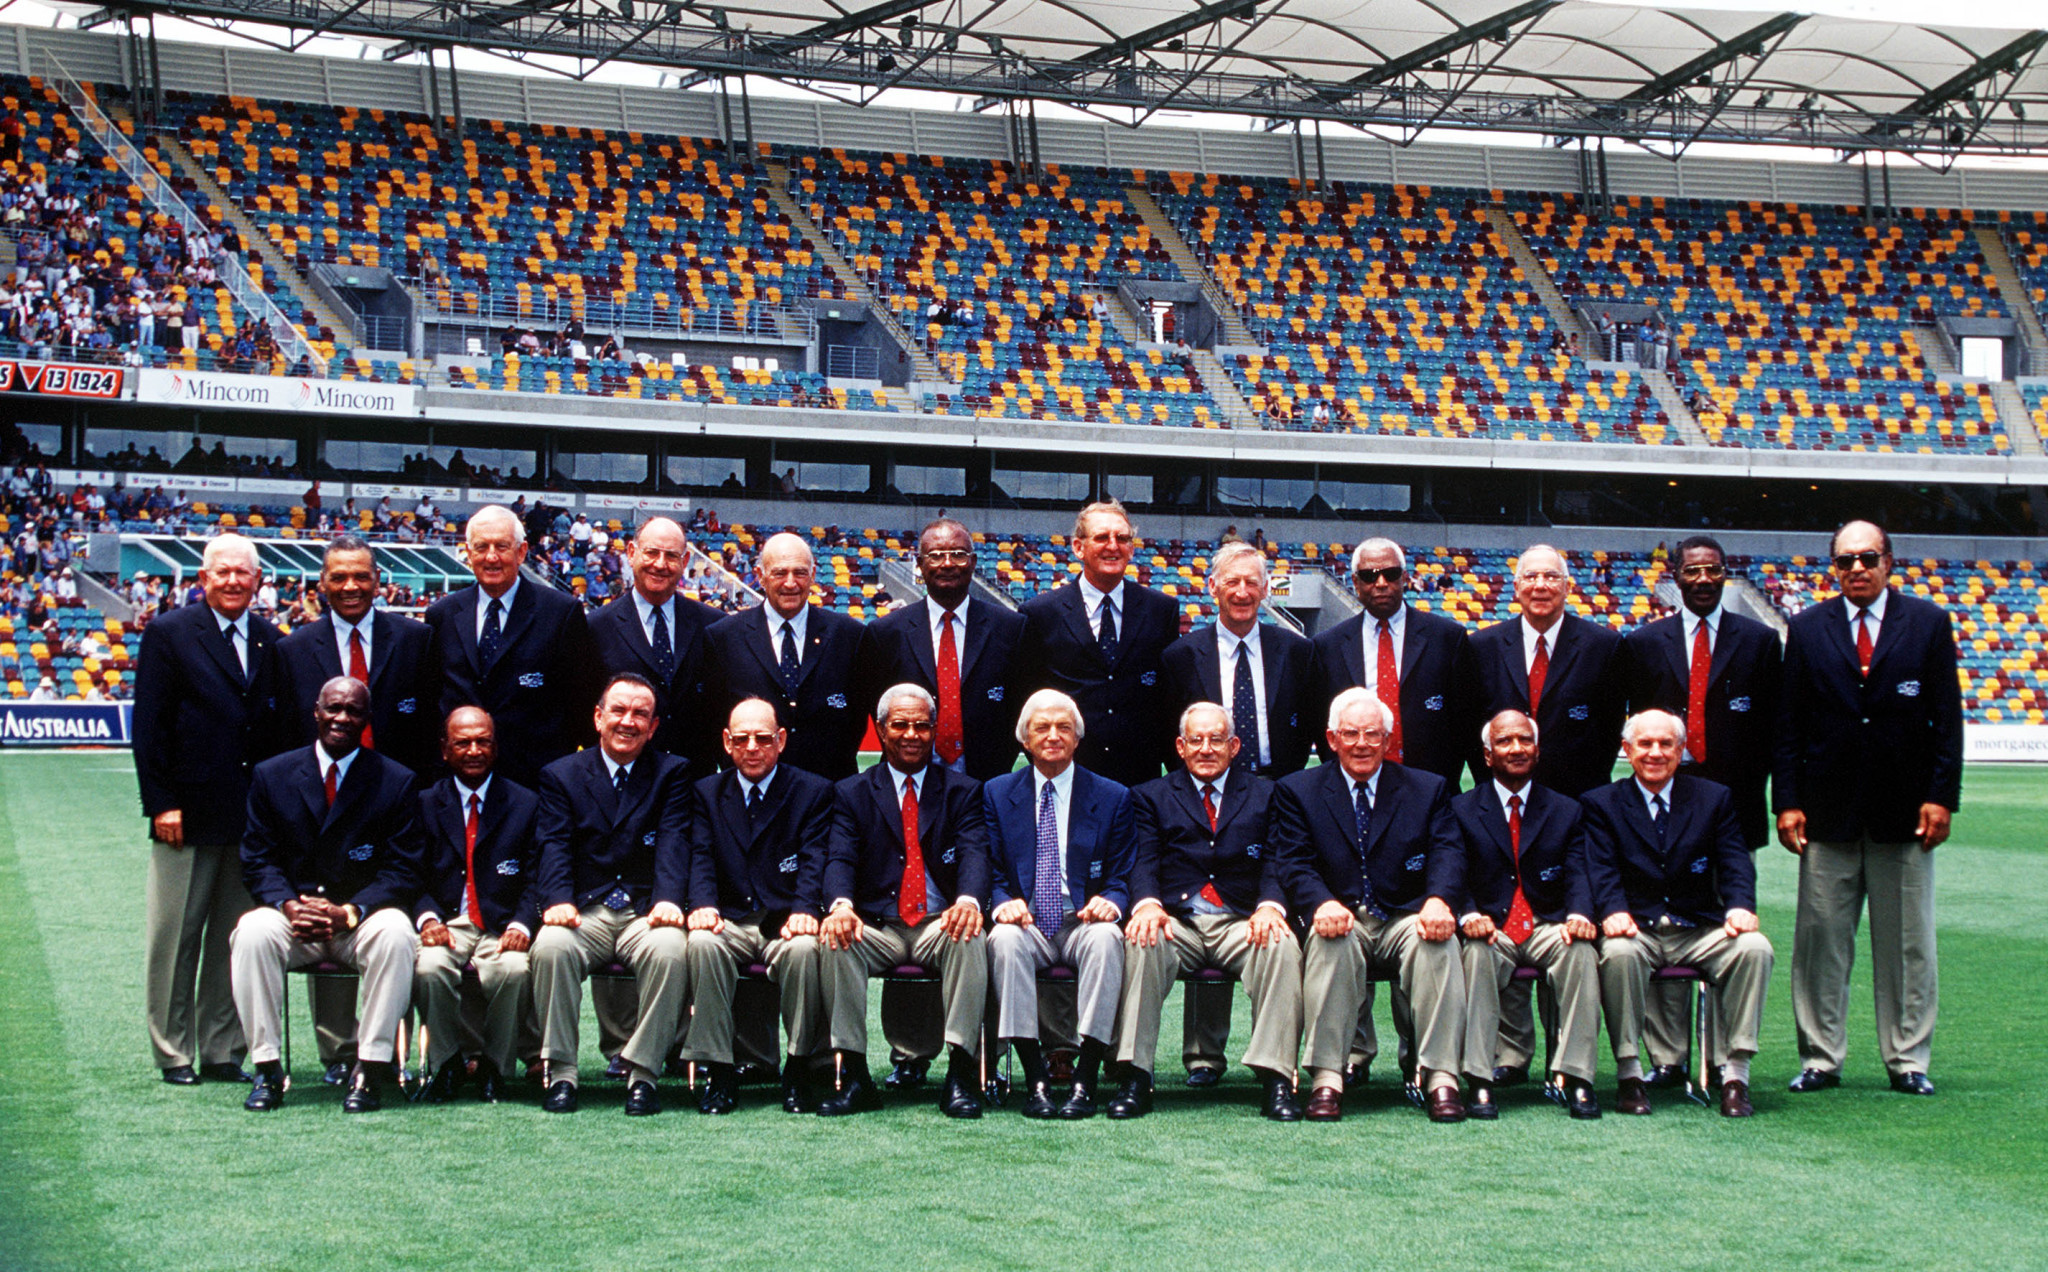 Many of those who played in the tied Test met 40 years later for a reunion ©Getty Images